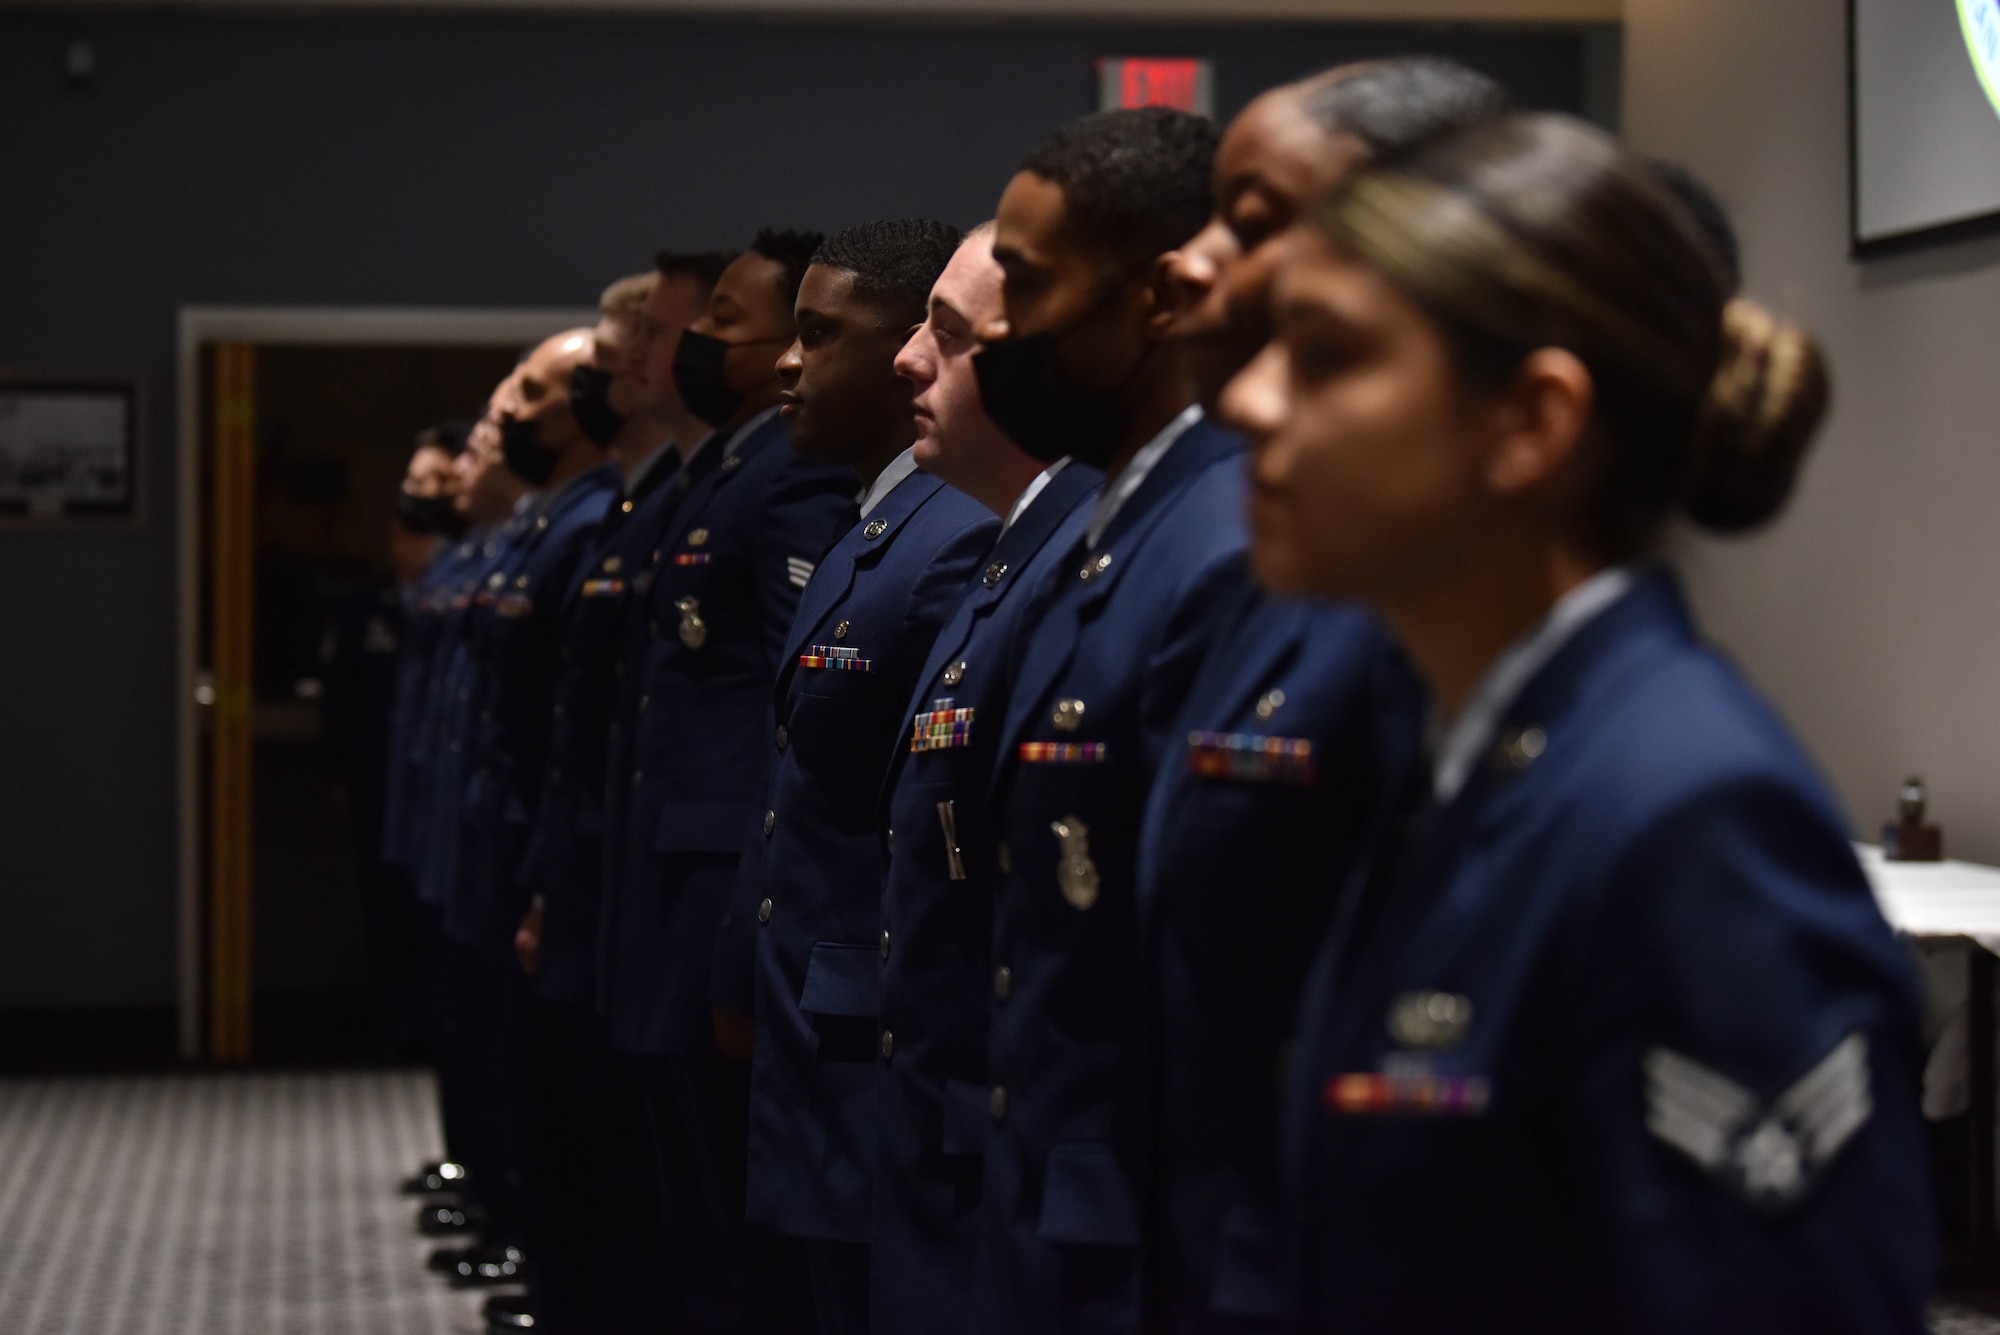 Airman Leadership School, Class 21-E graduates, line up to sing the Air Force song during the ALS graduation ceremony, on Goodfellow Air Force Base, Texas, July 8, 2021. ALS focuses on developing leadership abilities, the profession of arms, and building effective communication. (U.S. Air Force photo by Senior Airman Jermaine Ayers)